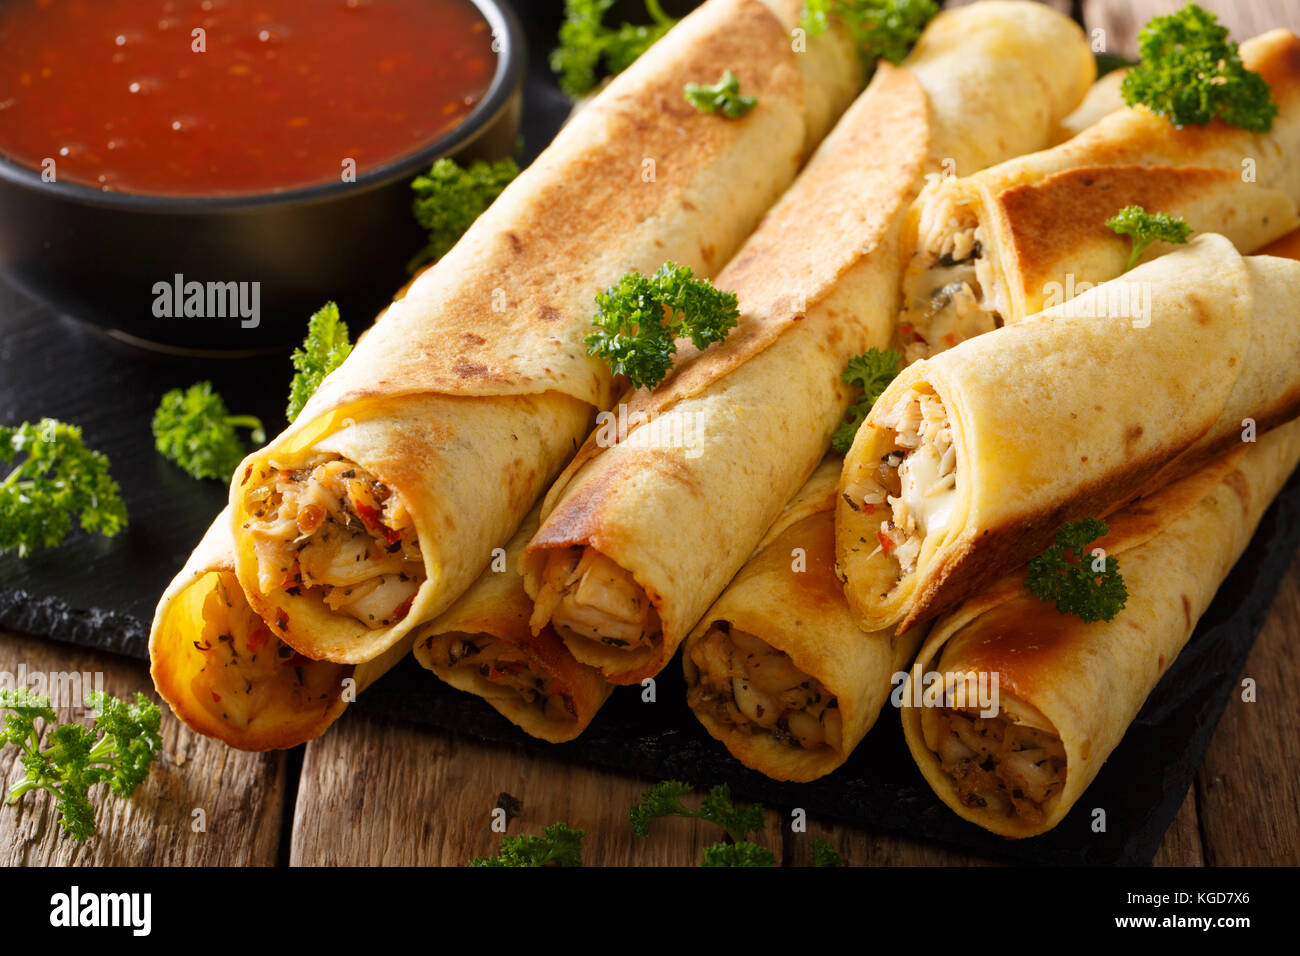 Mexican taquitos with chicken and chili sauce close-up on table. horizontal Stock Photo